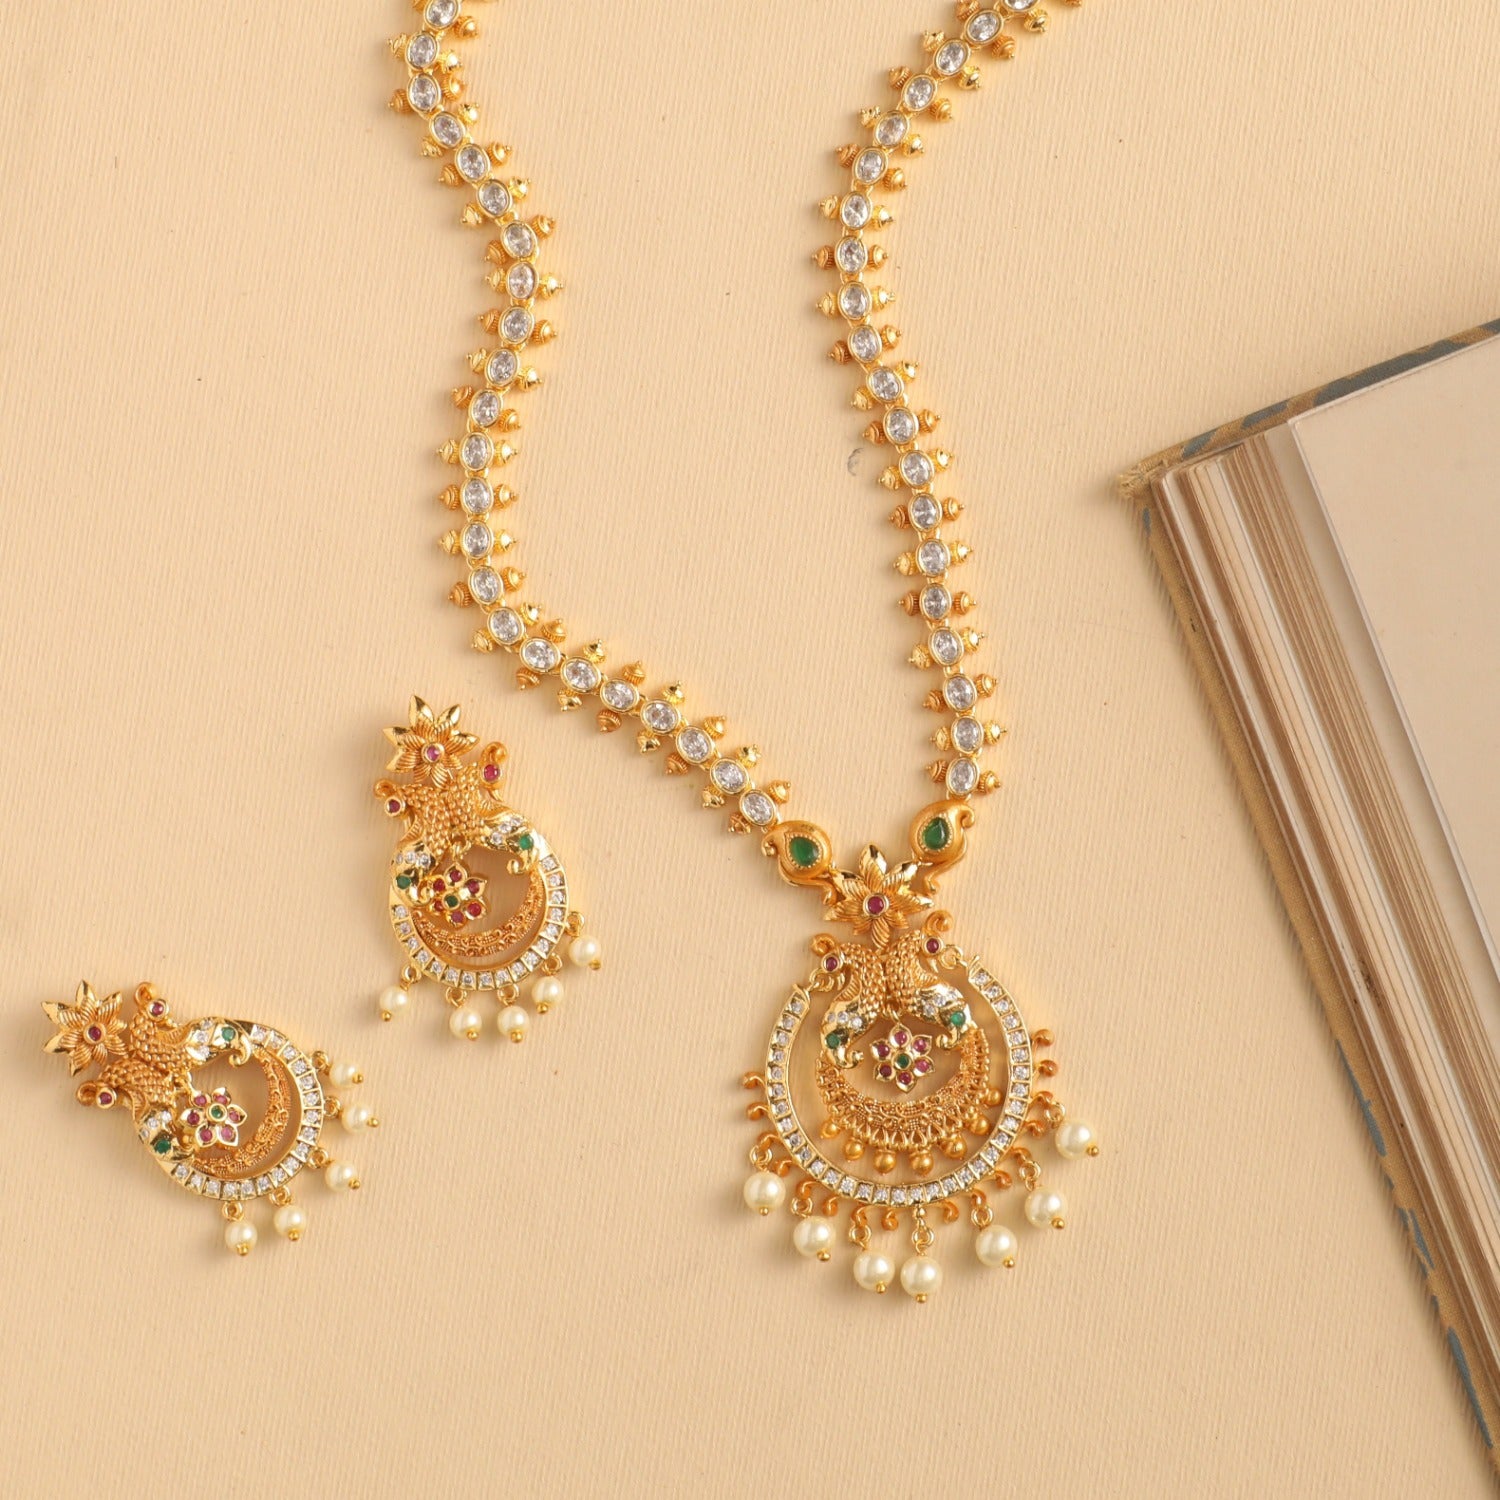 Ahmad Jewellery - Some Necklaces' Designs Which one is ur favorite